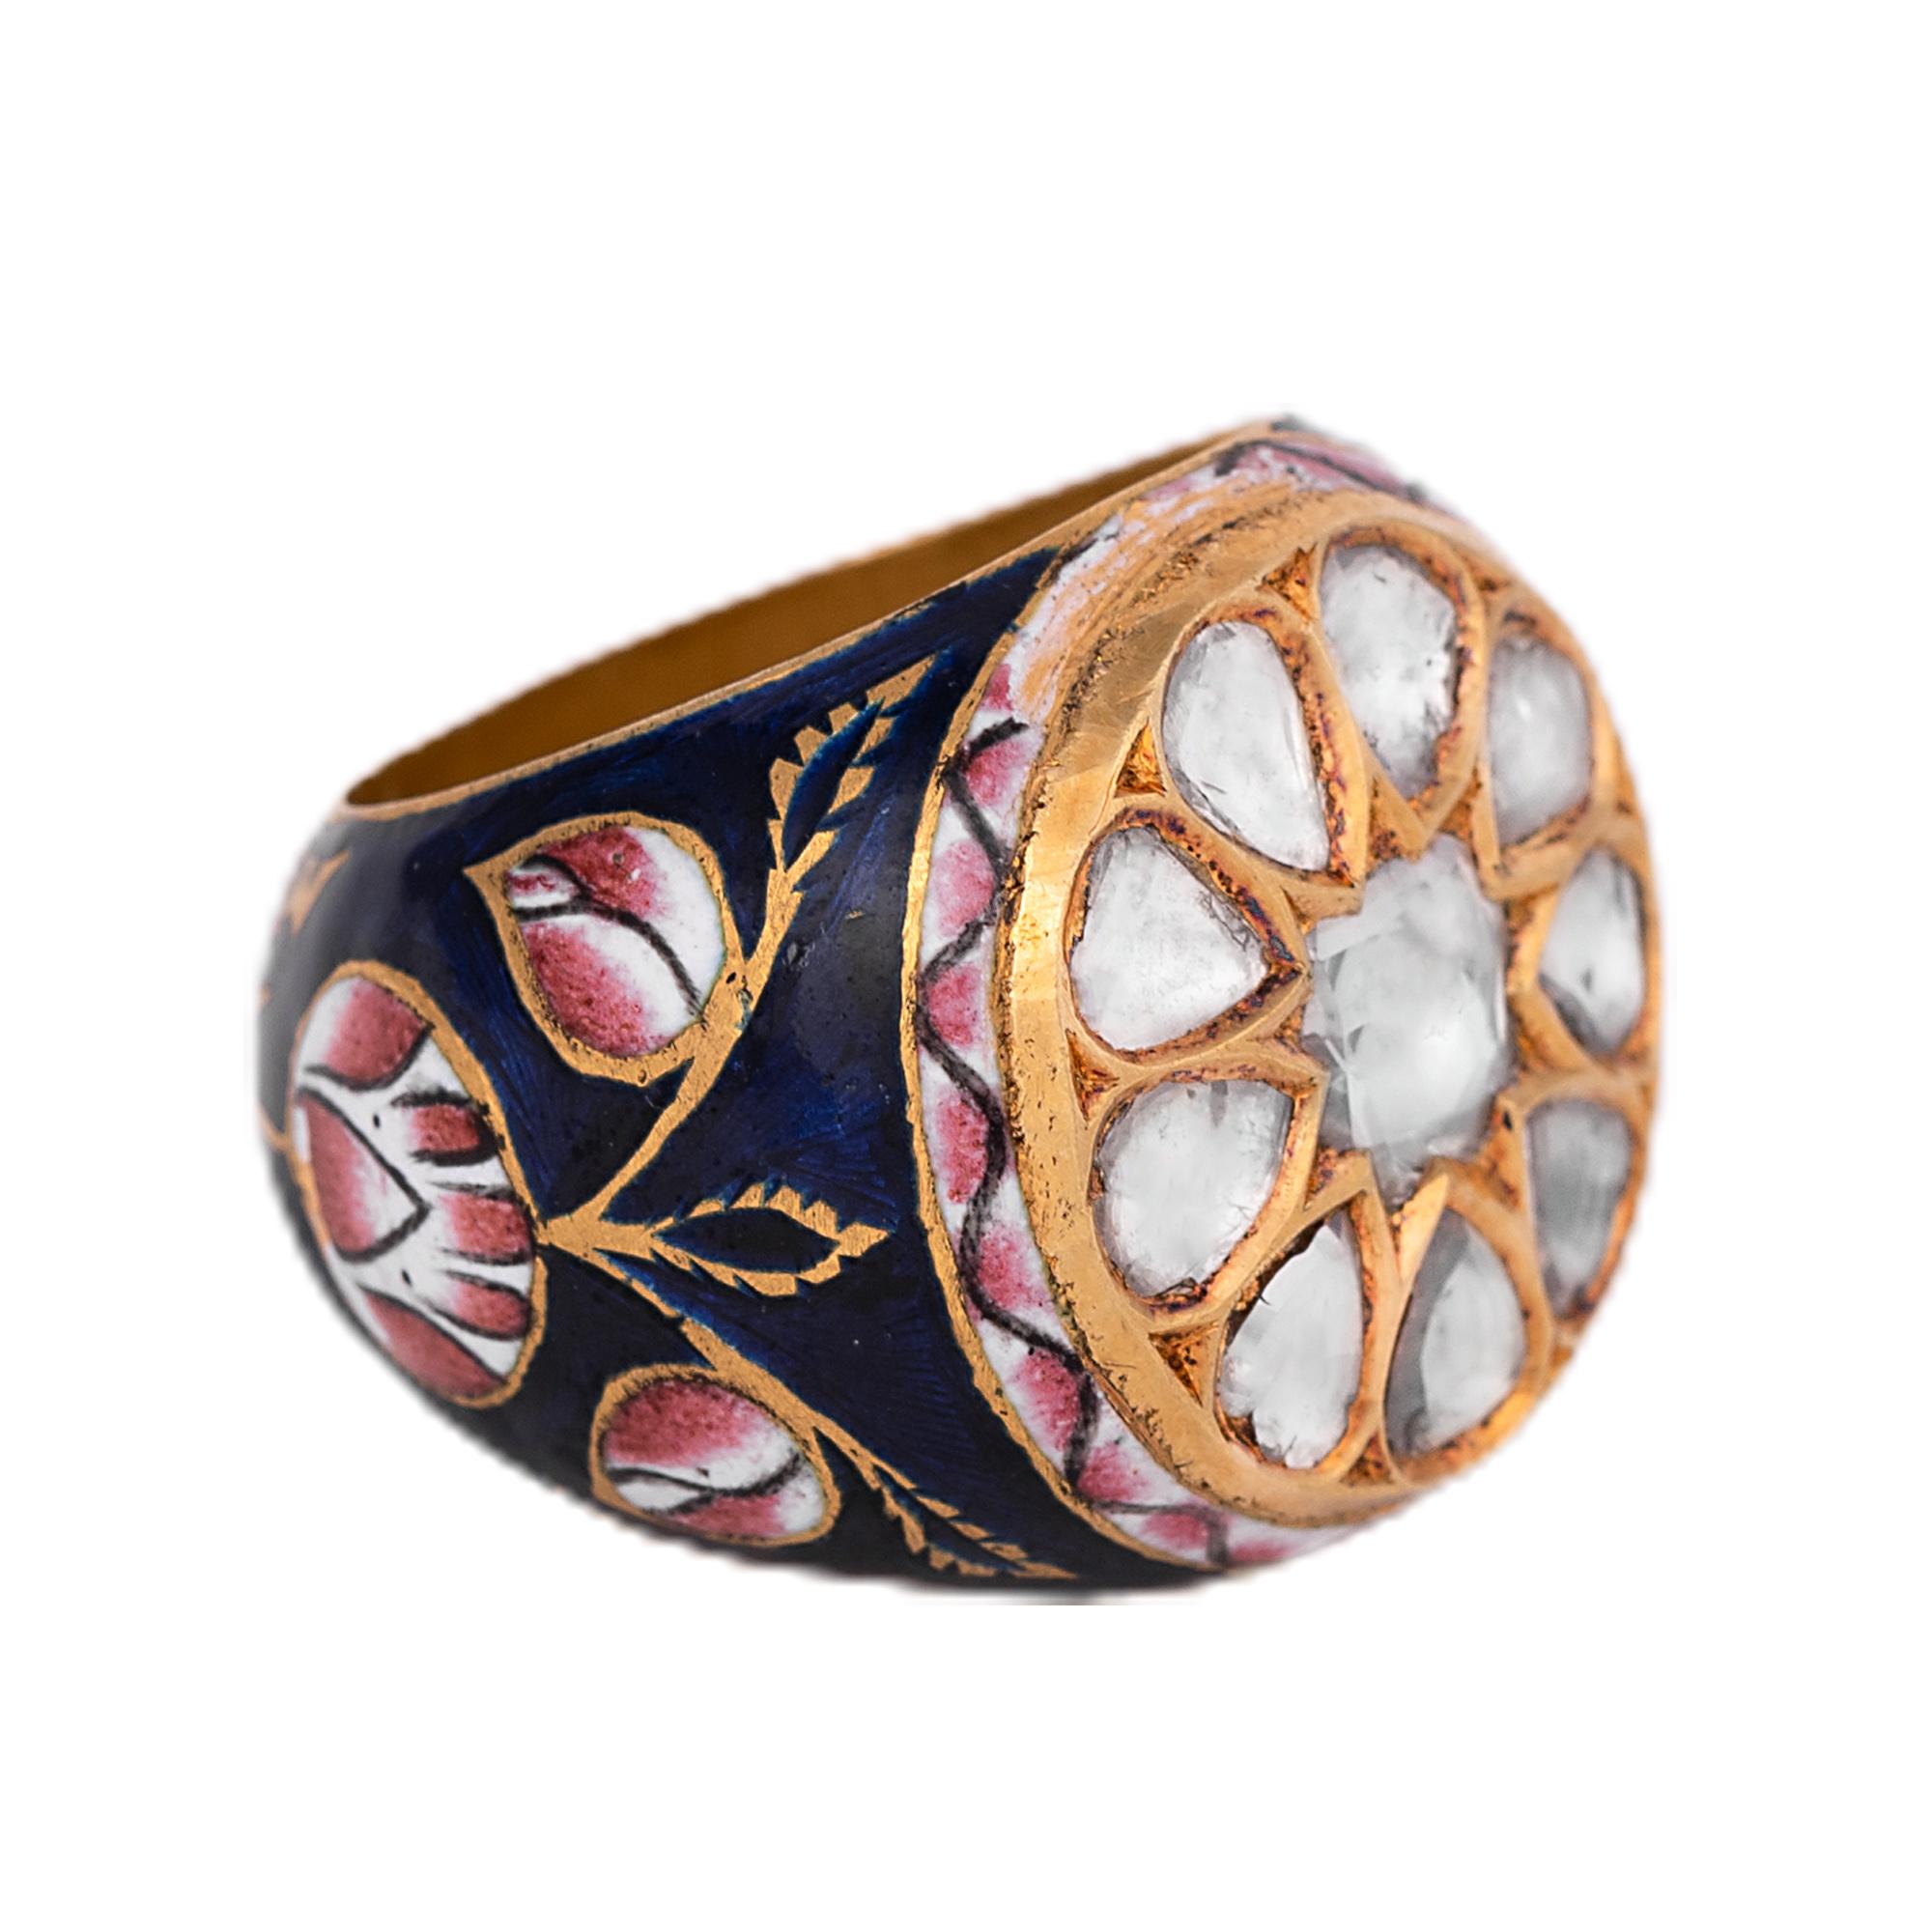 22 Karat Gold Diamond Cluster Ring with Blue, Red, and White Enamel Work 

This incredulous Mughal era style hand-made polki diamond ring with blue, red and white enamel is impressive. The uneven pear cut flat polki diamond solitaires set in gold